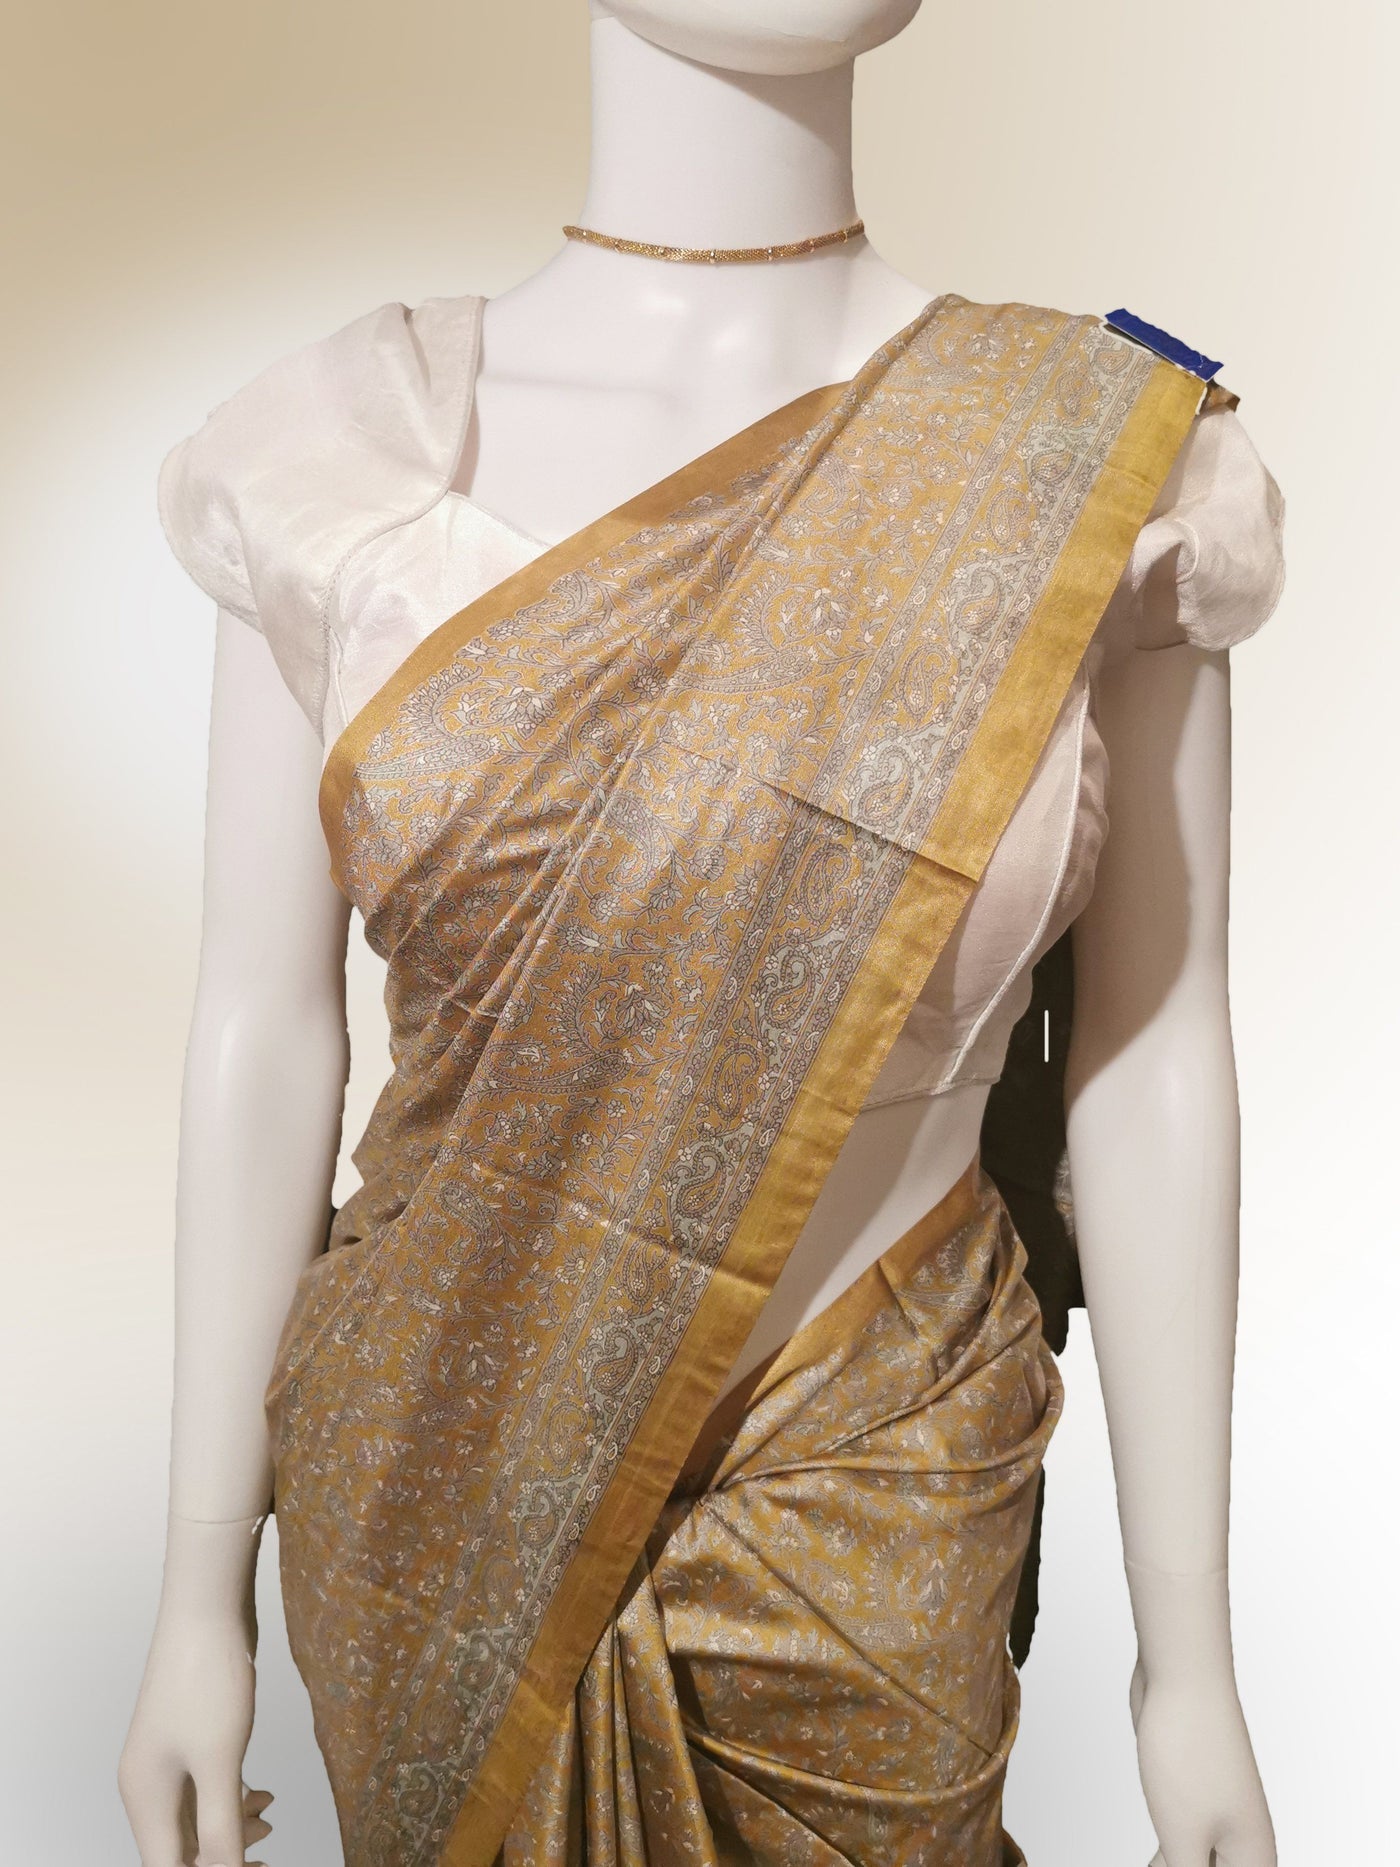 Saree in Yellow, Bronze and Gold in Traditional Print Indian Clothing in Denver, CO, Aurora, CO, Boulder, CO, Fort Collins, CO, Colorado Springs, CO, Parker, CO, Highlands Ranch, CO, Cherry Creek, CO, Centennial, CO, and Longmont, CO. NATIONWIDE SHIPPING USA- India Fashion X